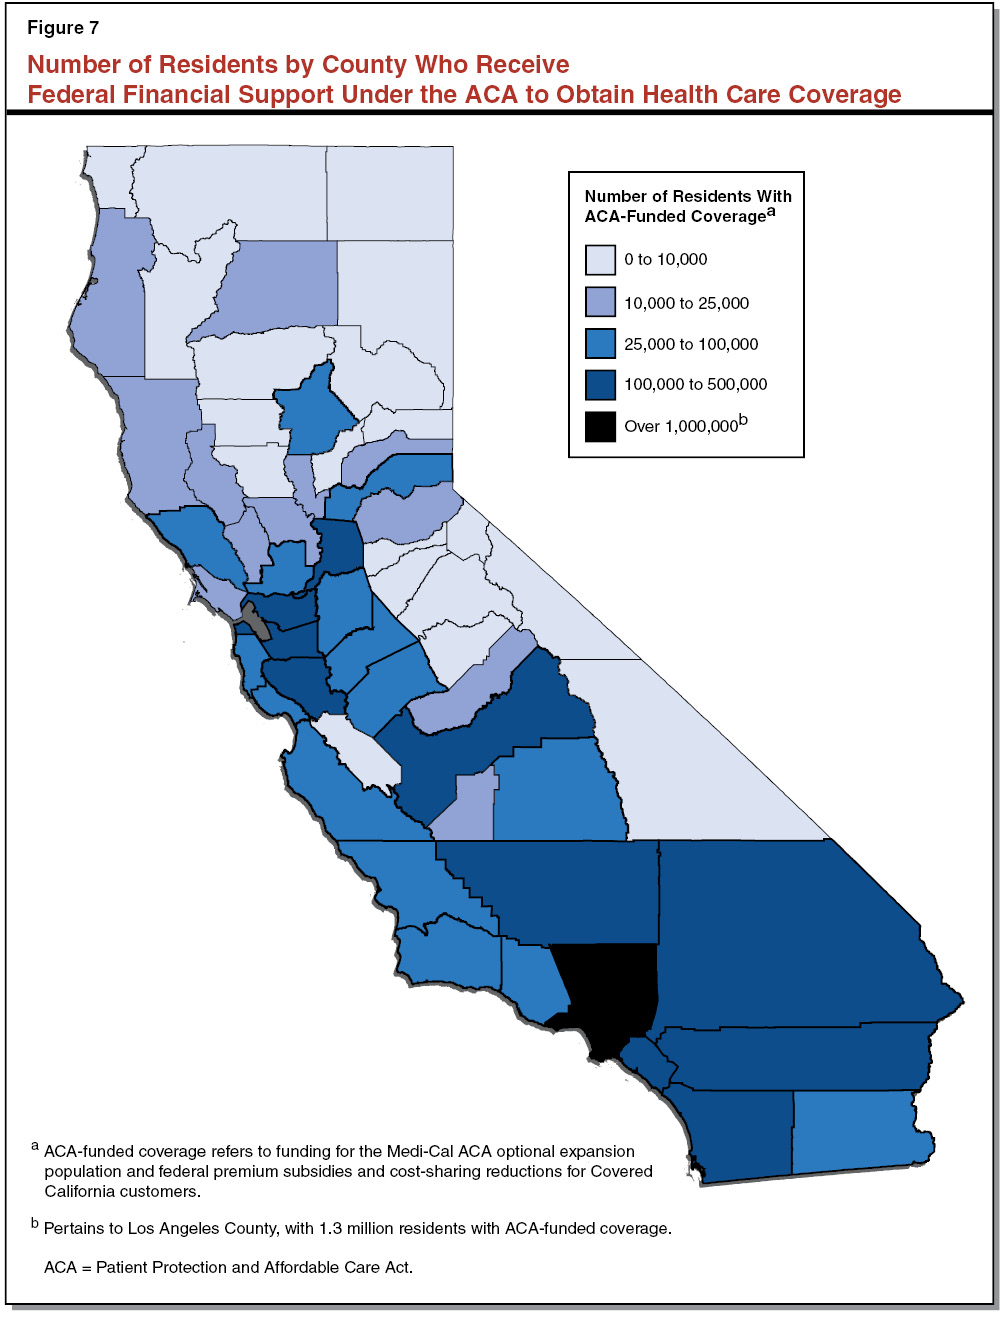 3569-report-web-resources/image/Figure 7 - Number of Residents by County who Receive Federal Financial Support Under the ACA to Obtain Health Care Coverage